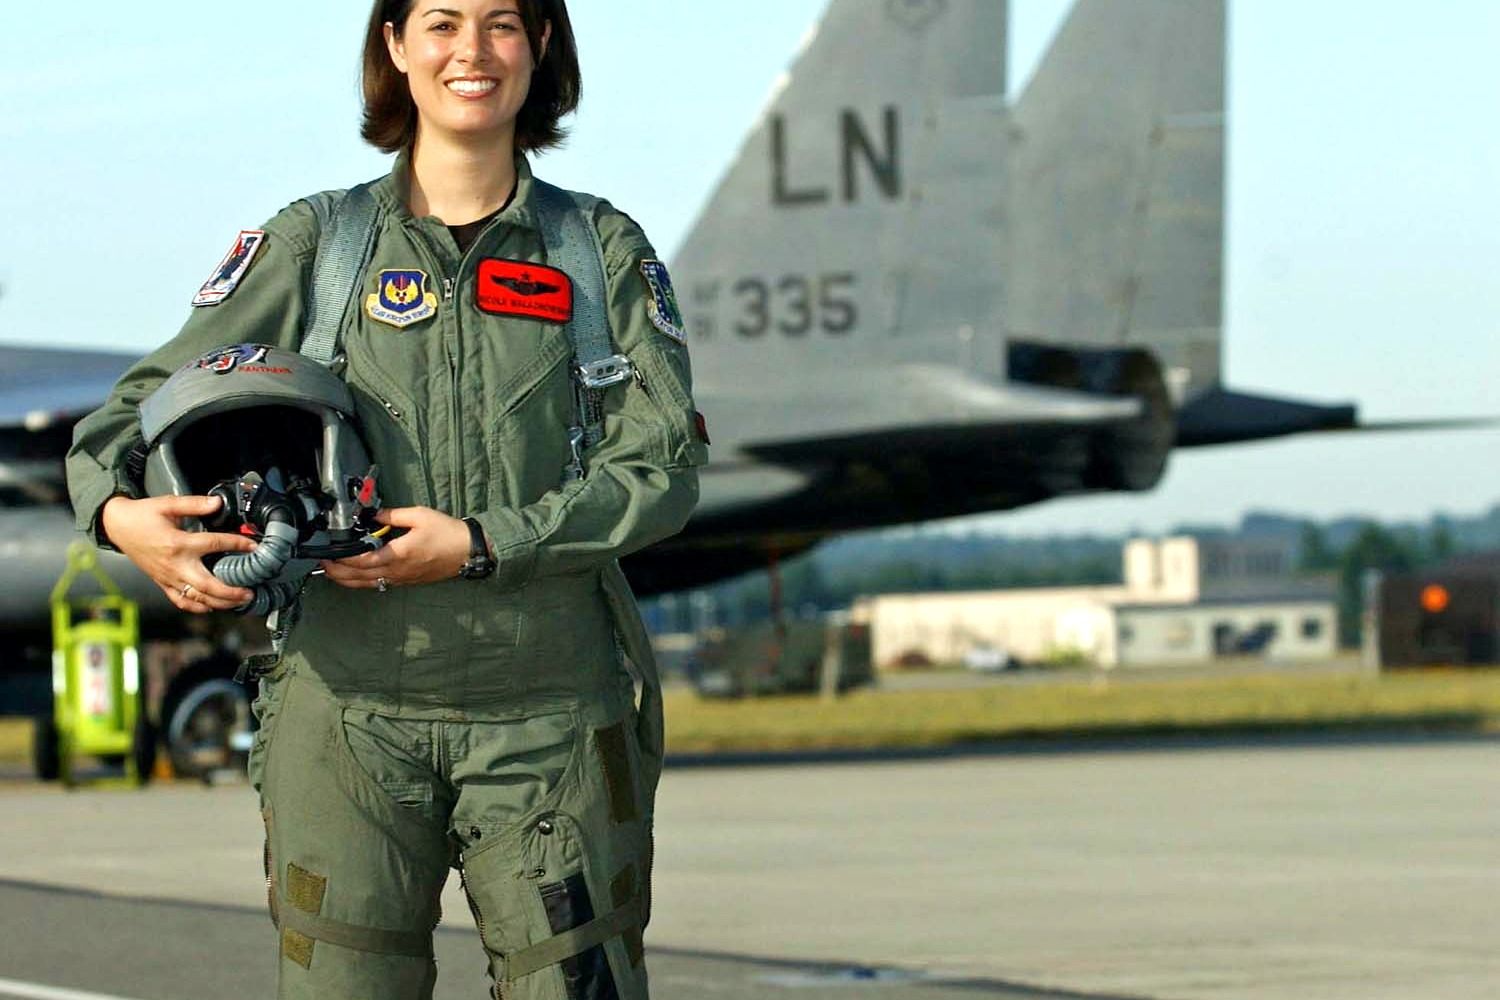 Capt. Nicole Malachowski was selected for the 2006 U.S. Air Force Air Demonstration Squadron, 